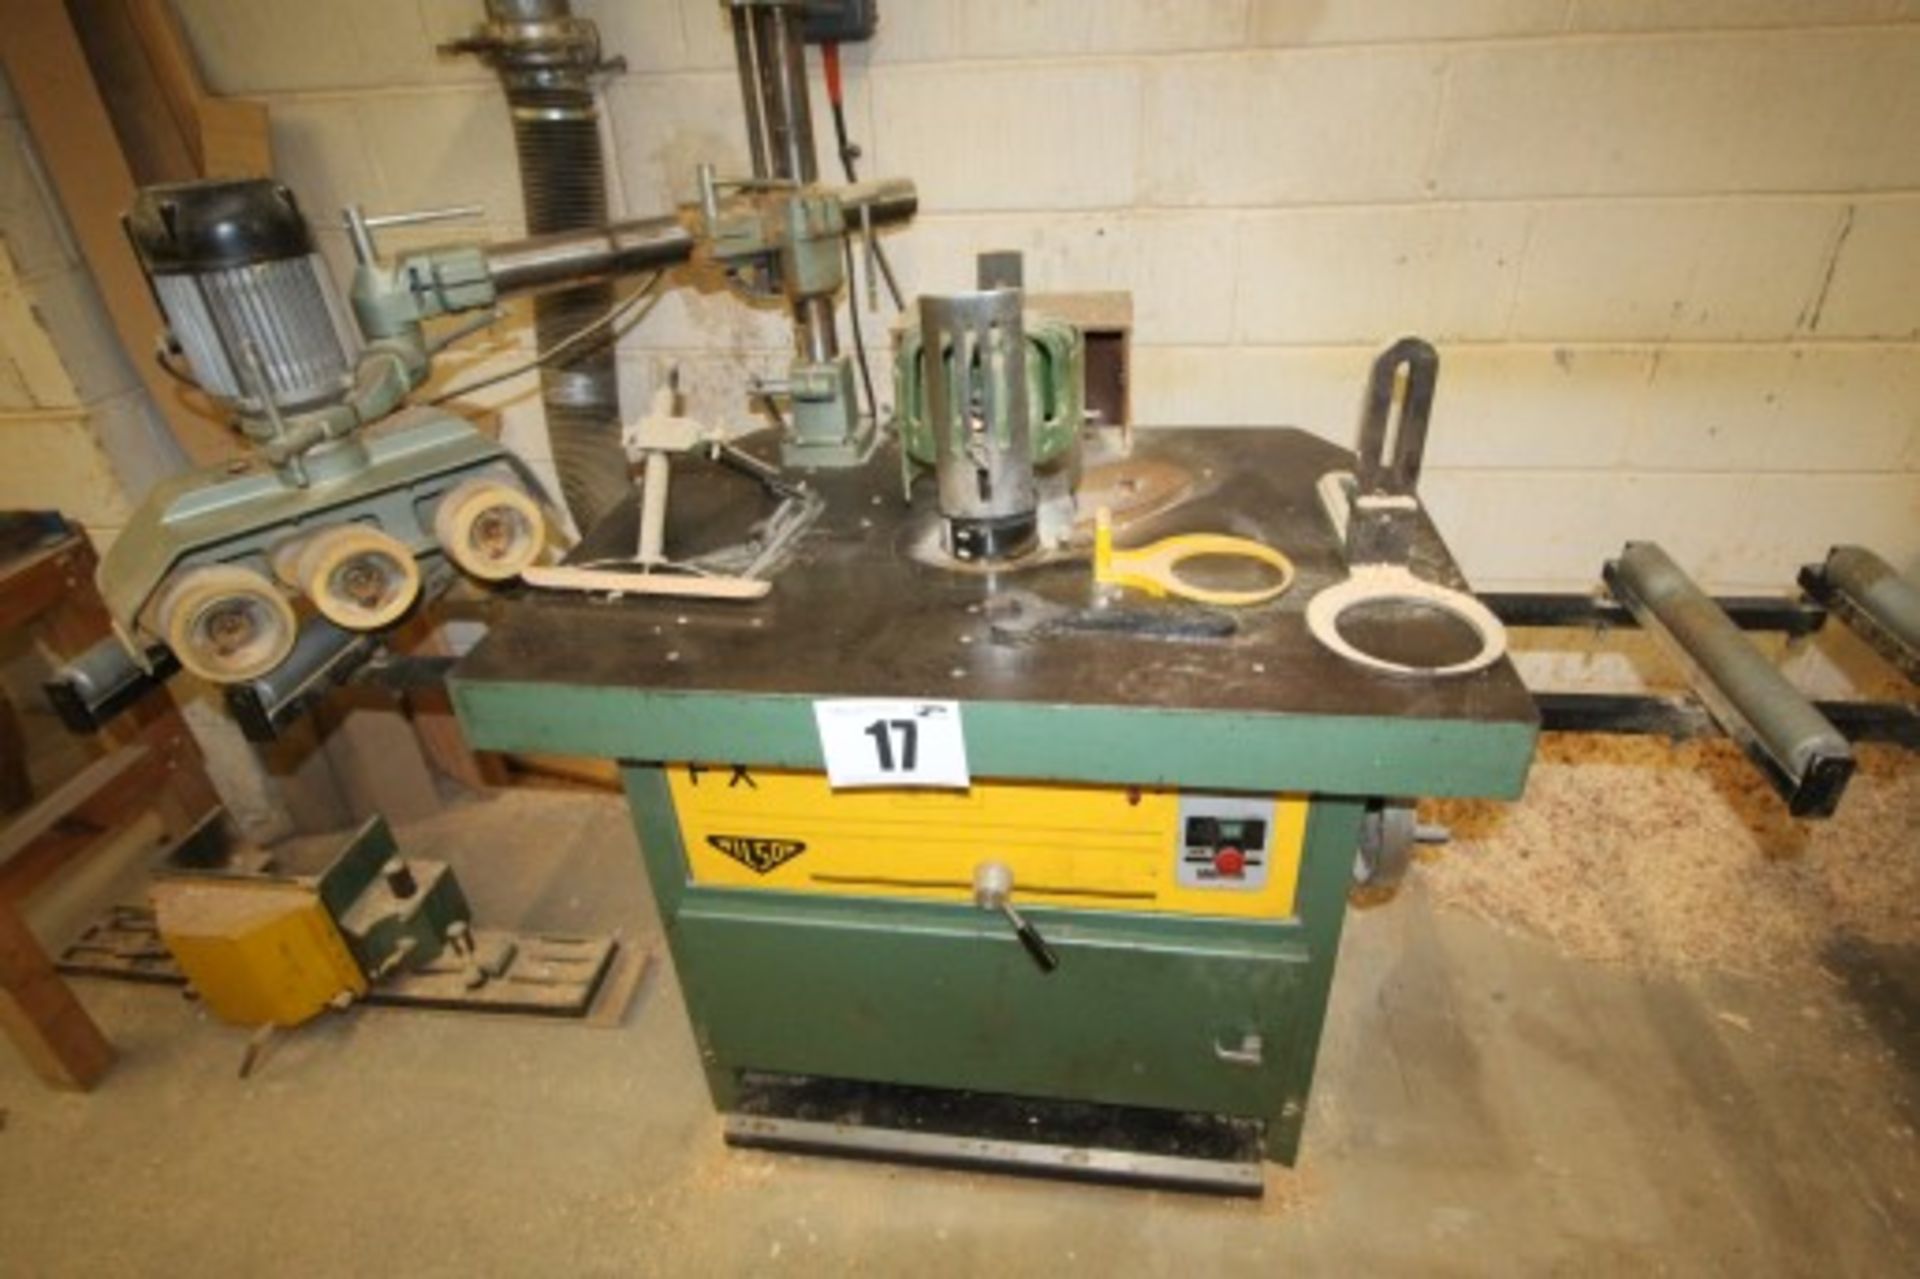 WILSON MODEL FX VERTICAL SPINDLE MOULDER COMPLETE WITH AZETA MODEL 304 POWER FEED COMPLETE WITH 2